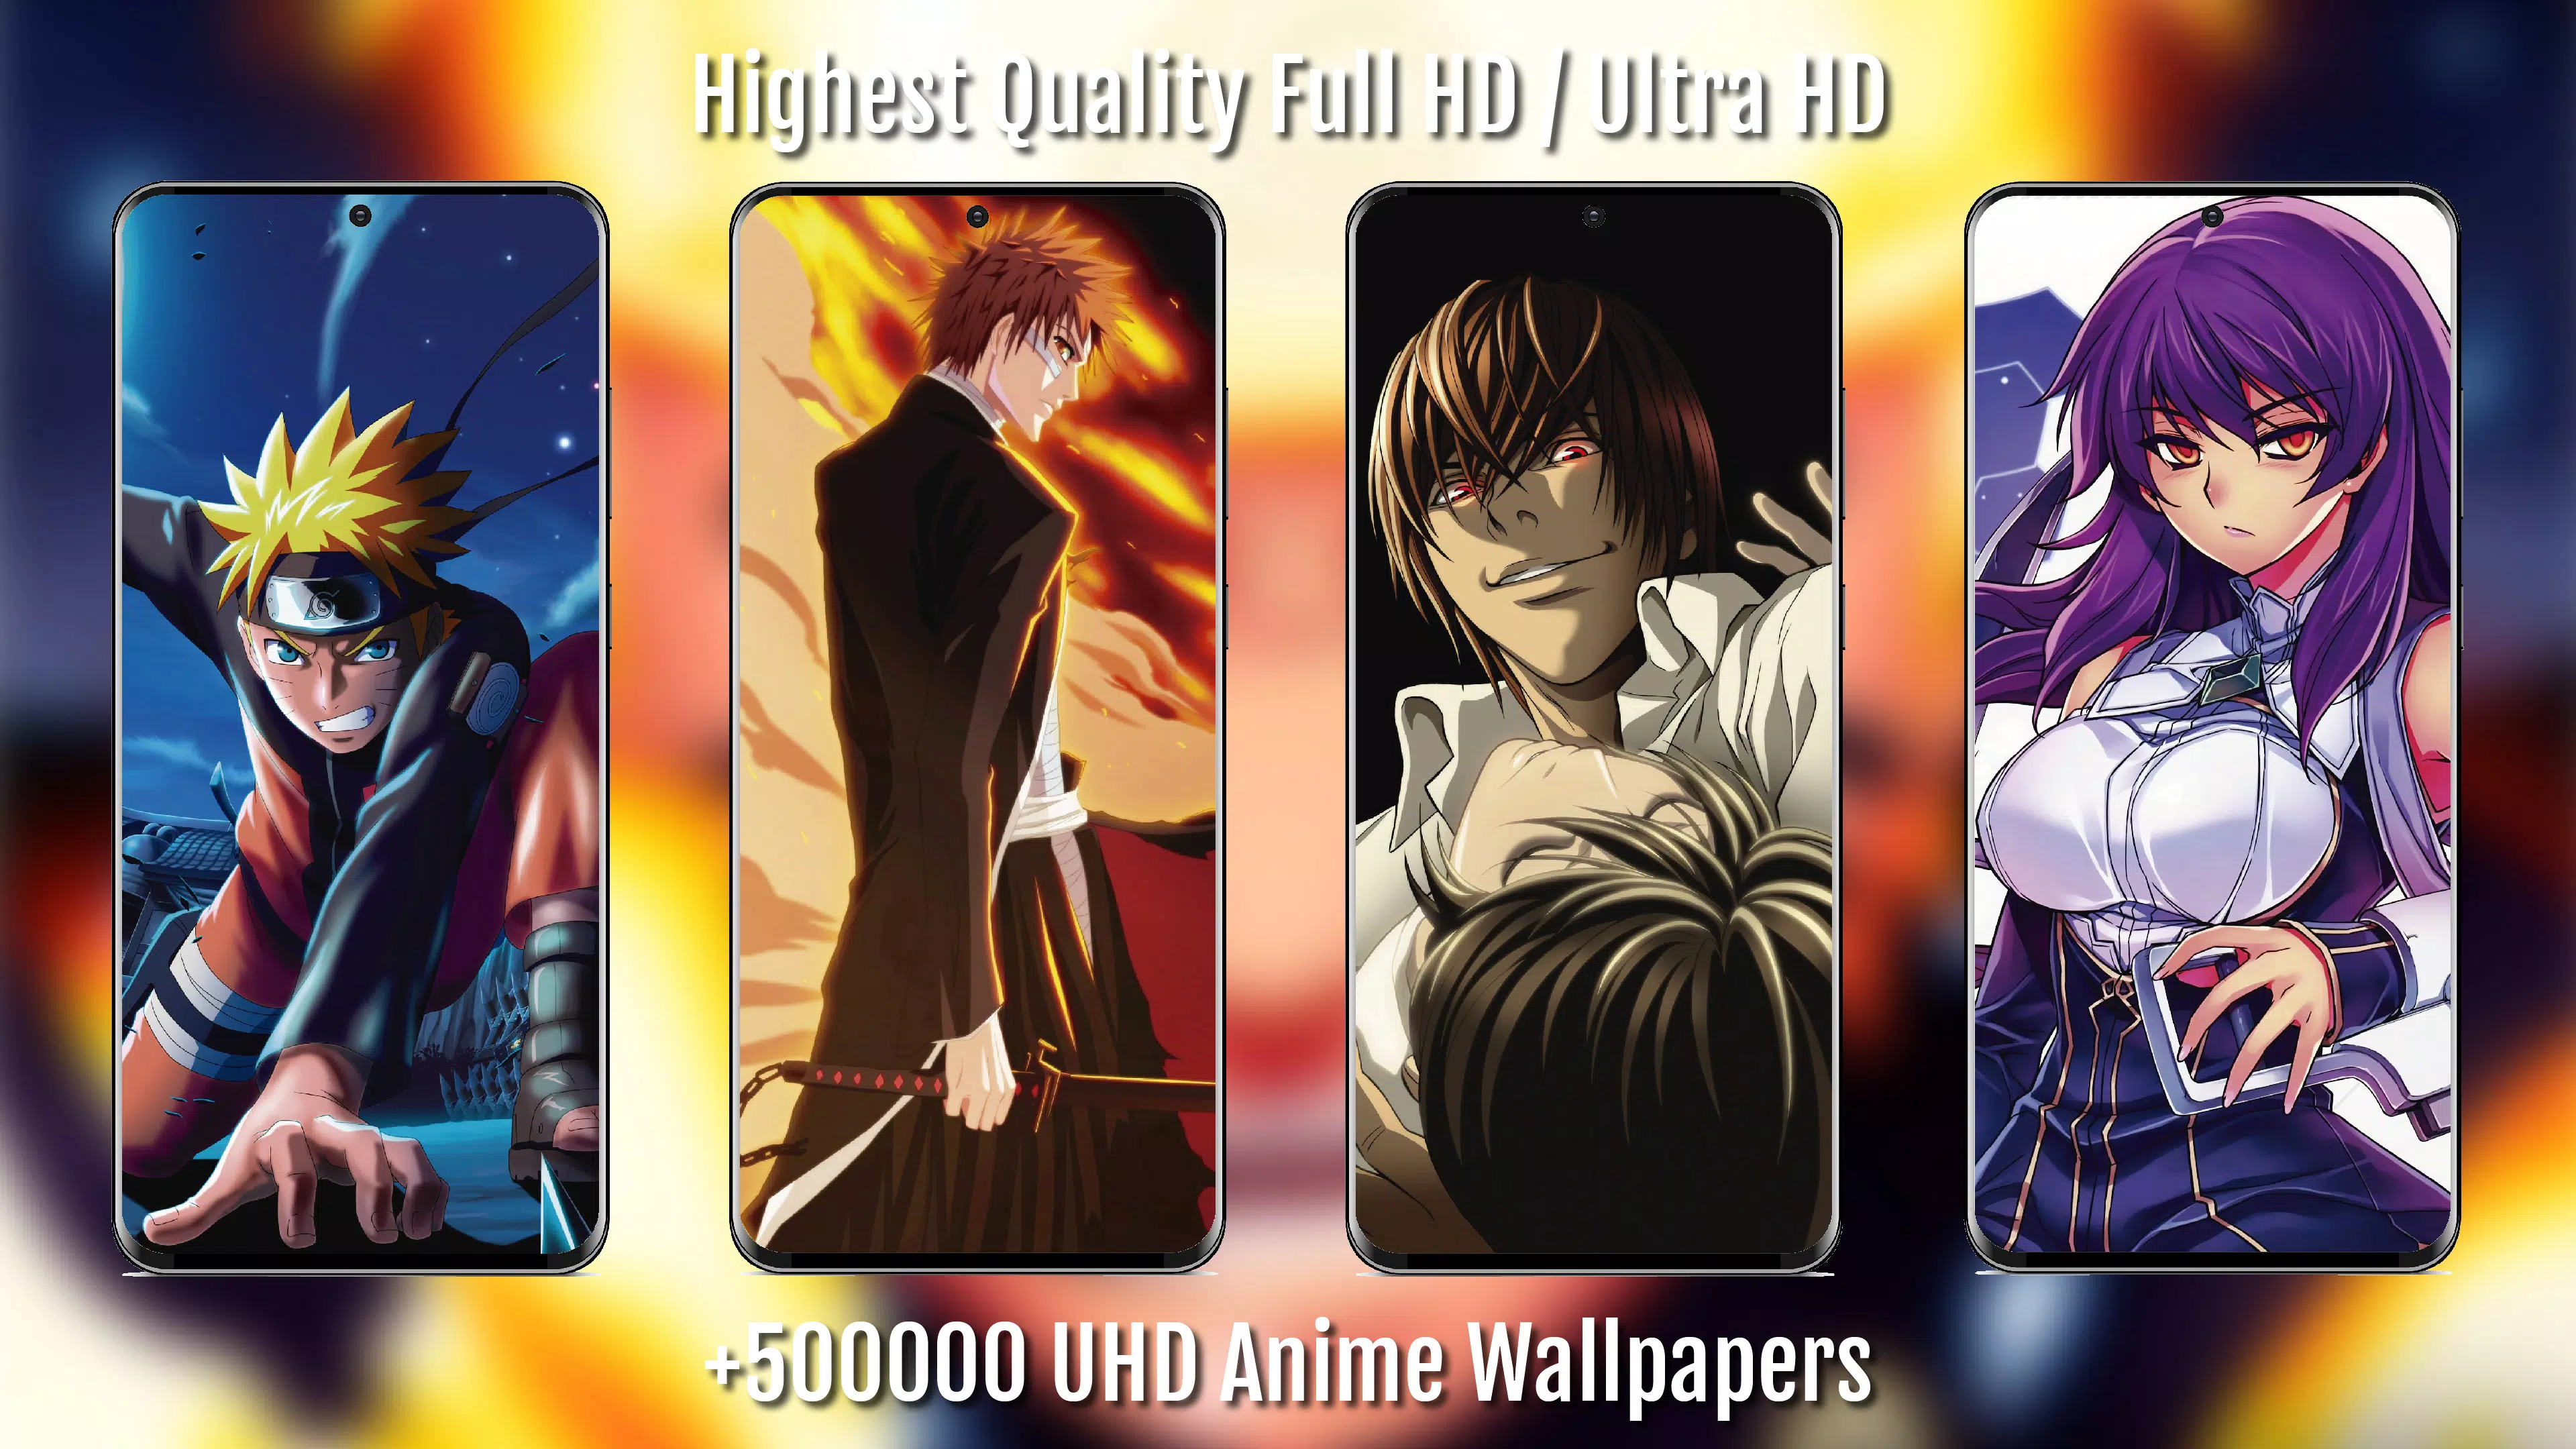 Download Anime Wallpaper HD 4K APK for Android, Run on PC and Mac